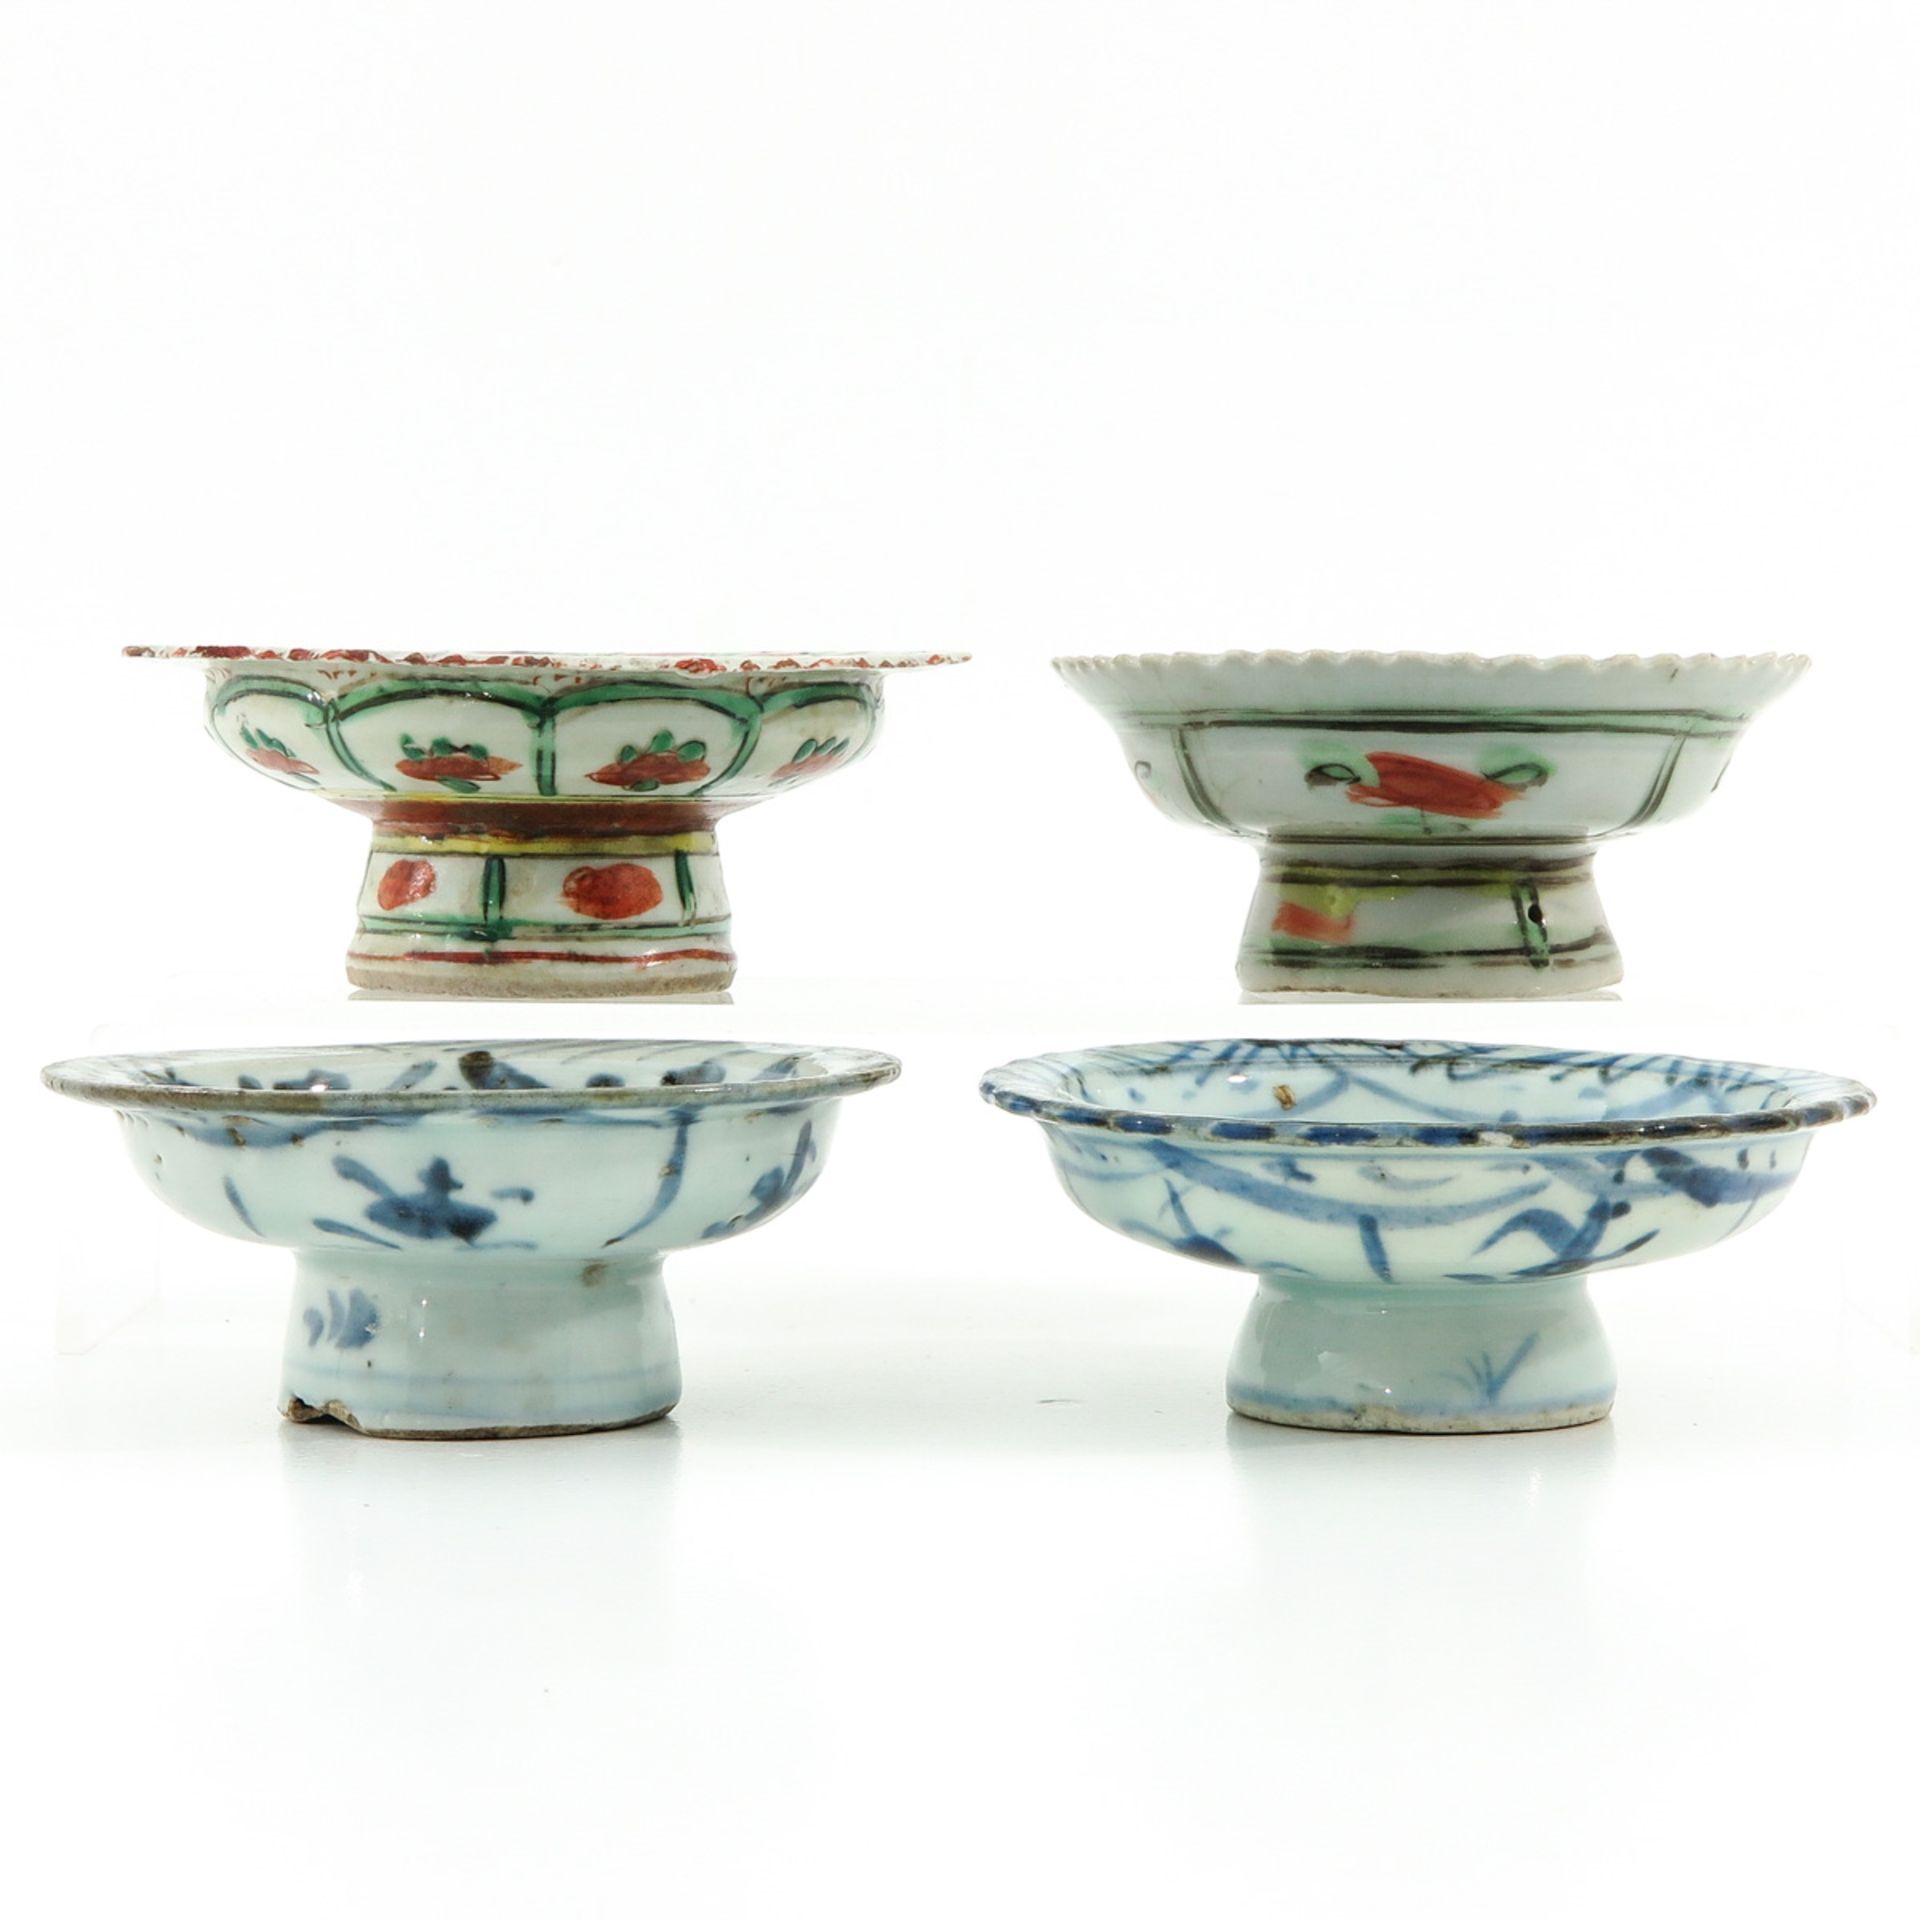 A Collection of 4 Stemmed Bowls - Image 4 of 10